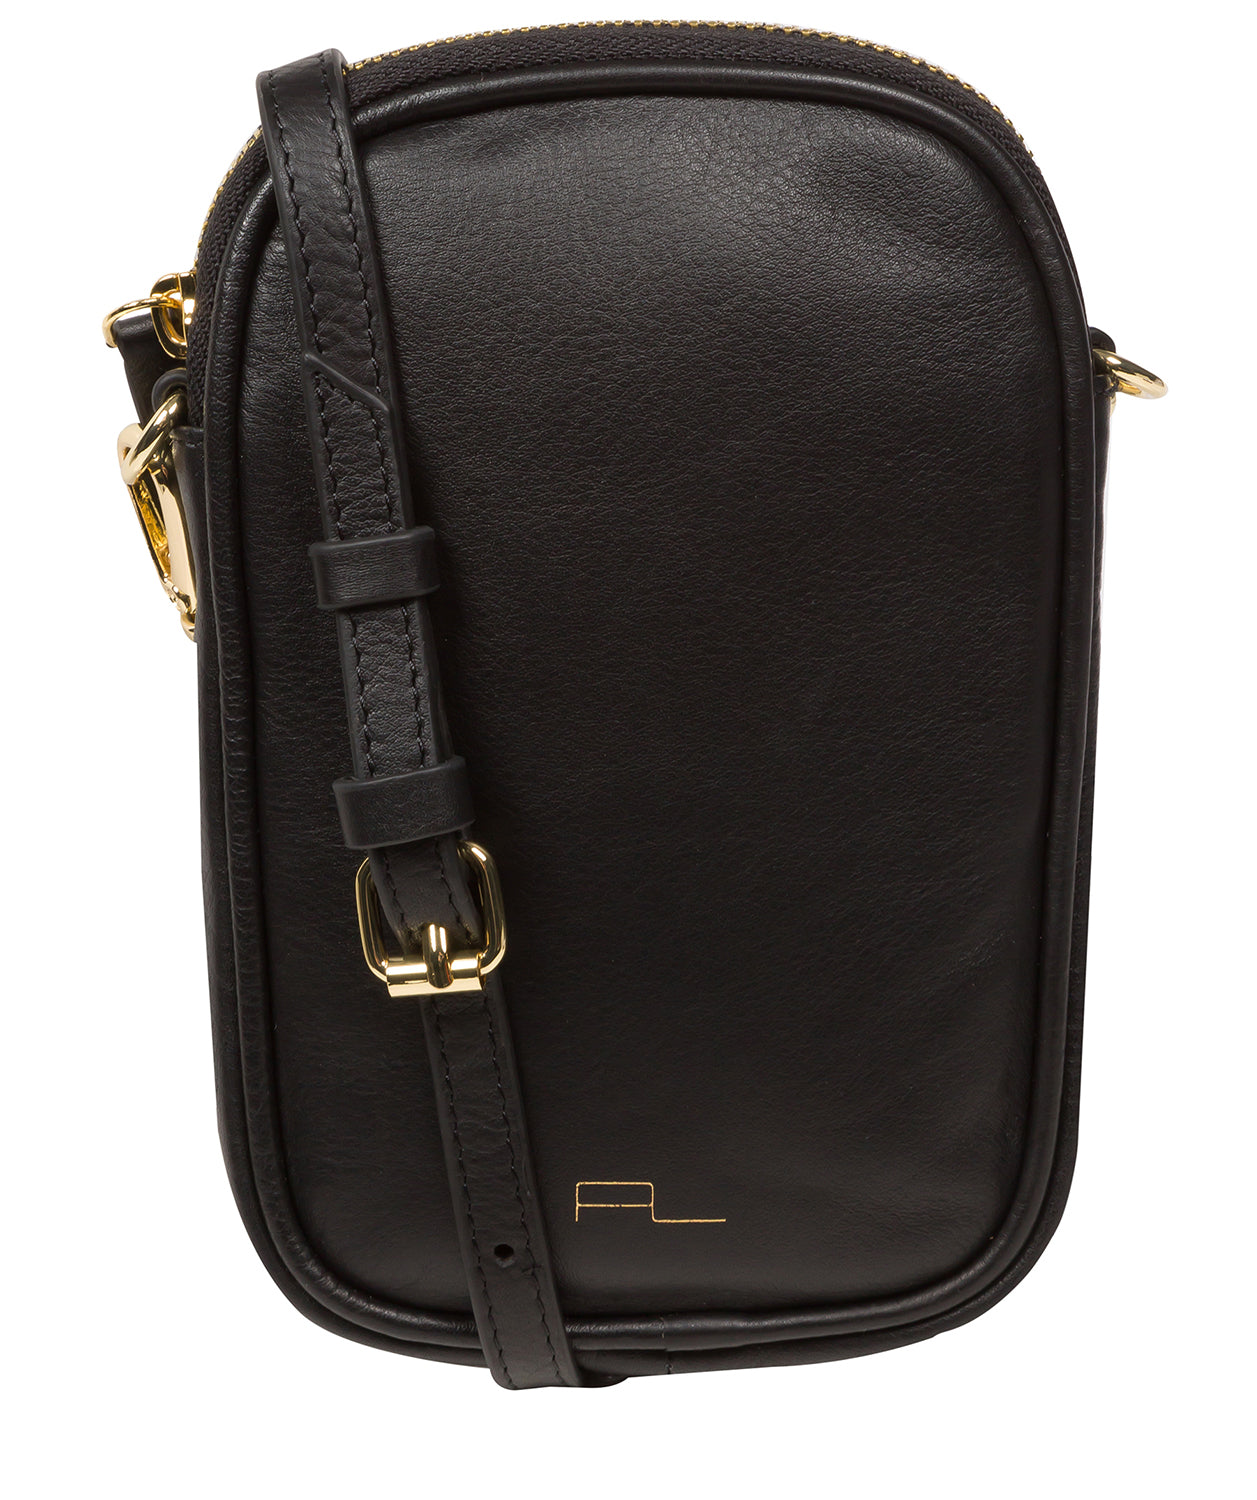  Oak Leathers Leather Crossbody Handbag For Ladies, Medium, Black Over The Shoulder Bag With Zip, Multiple Compartment